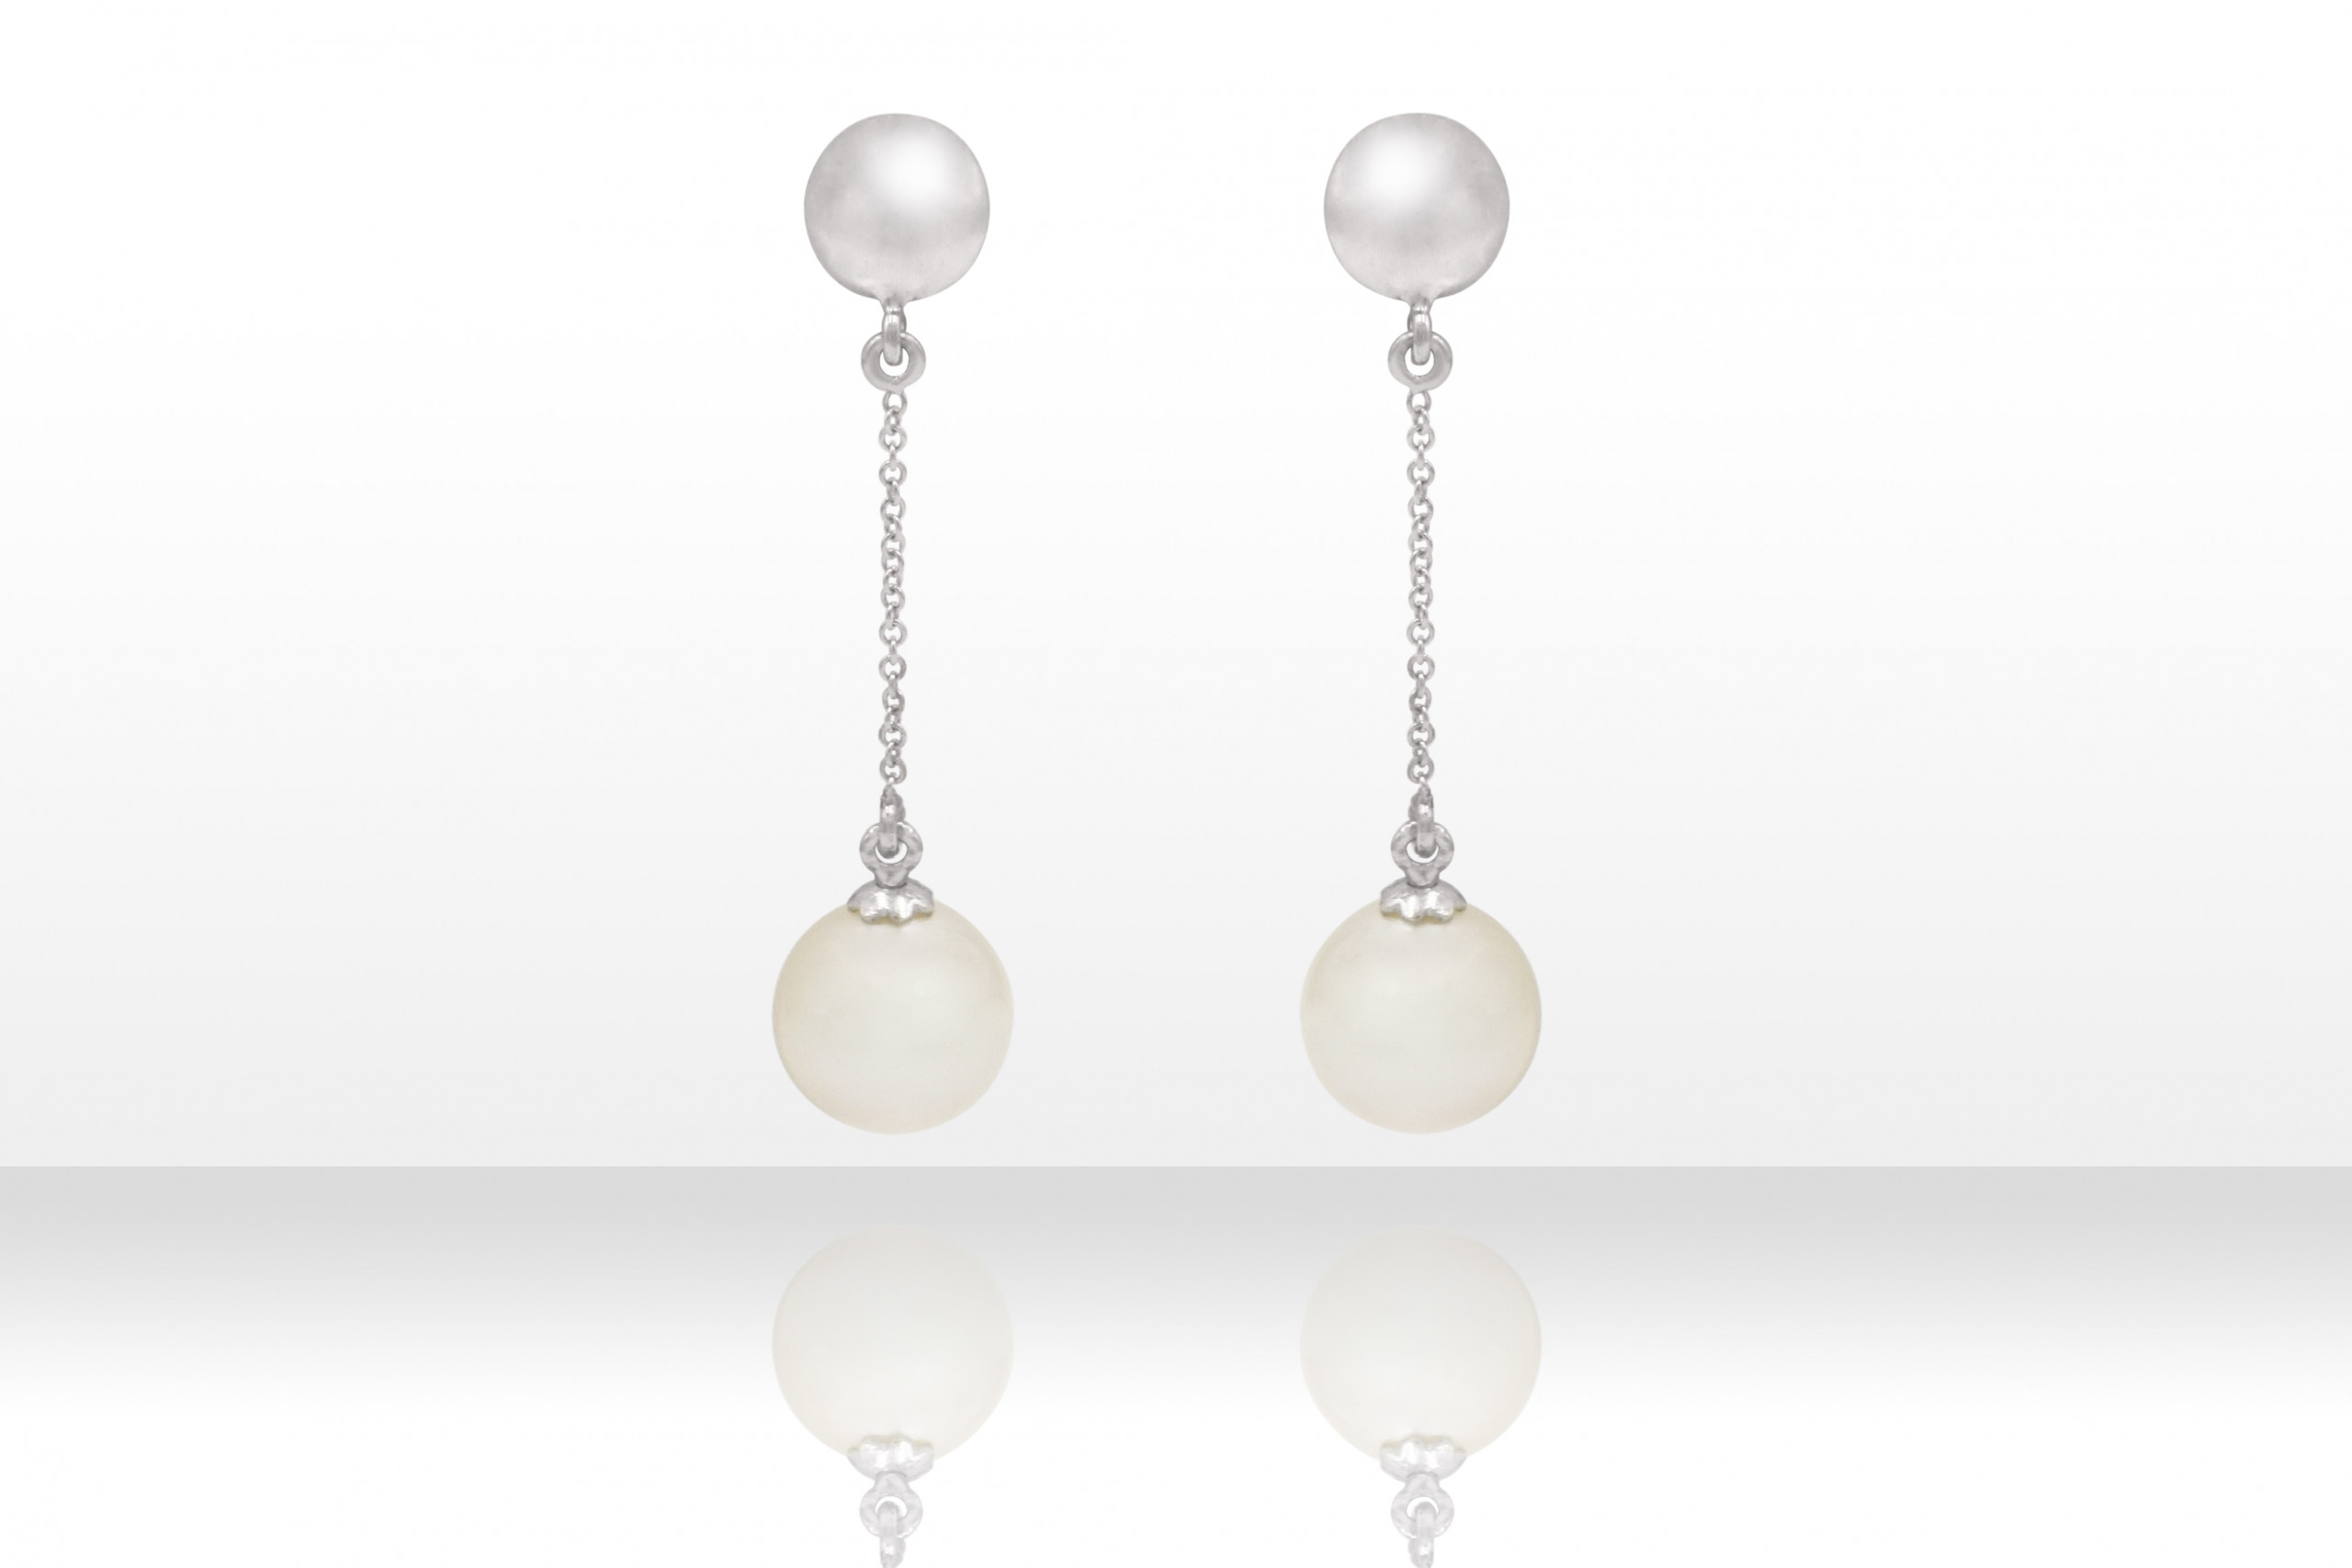 18 kt White Gold and Pearls Earrings | Ivan 18 Kr Gold